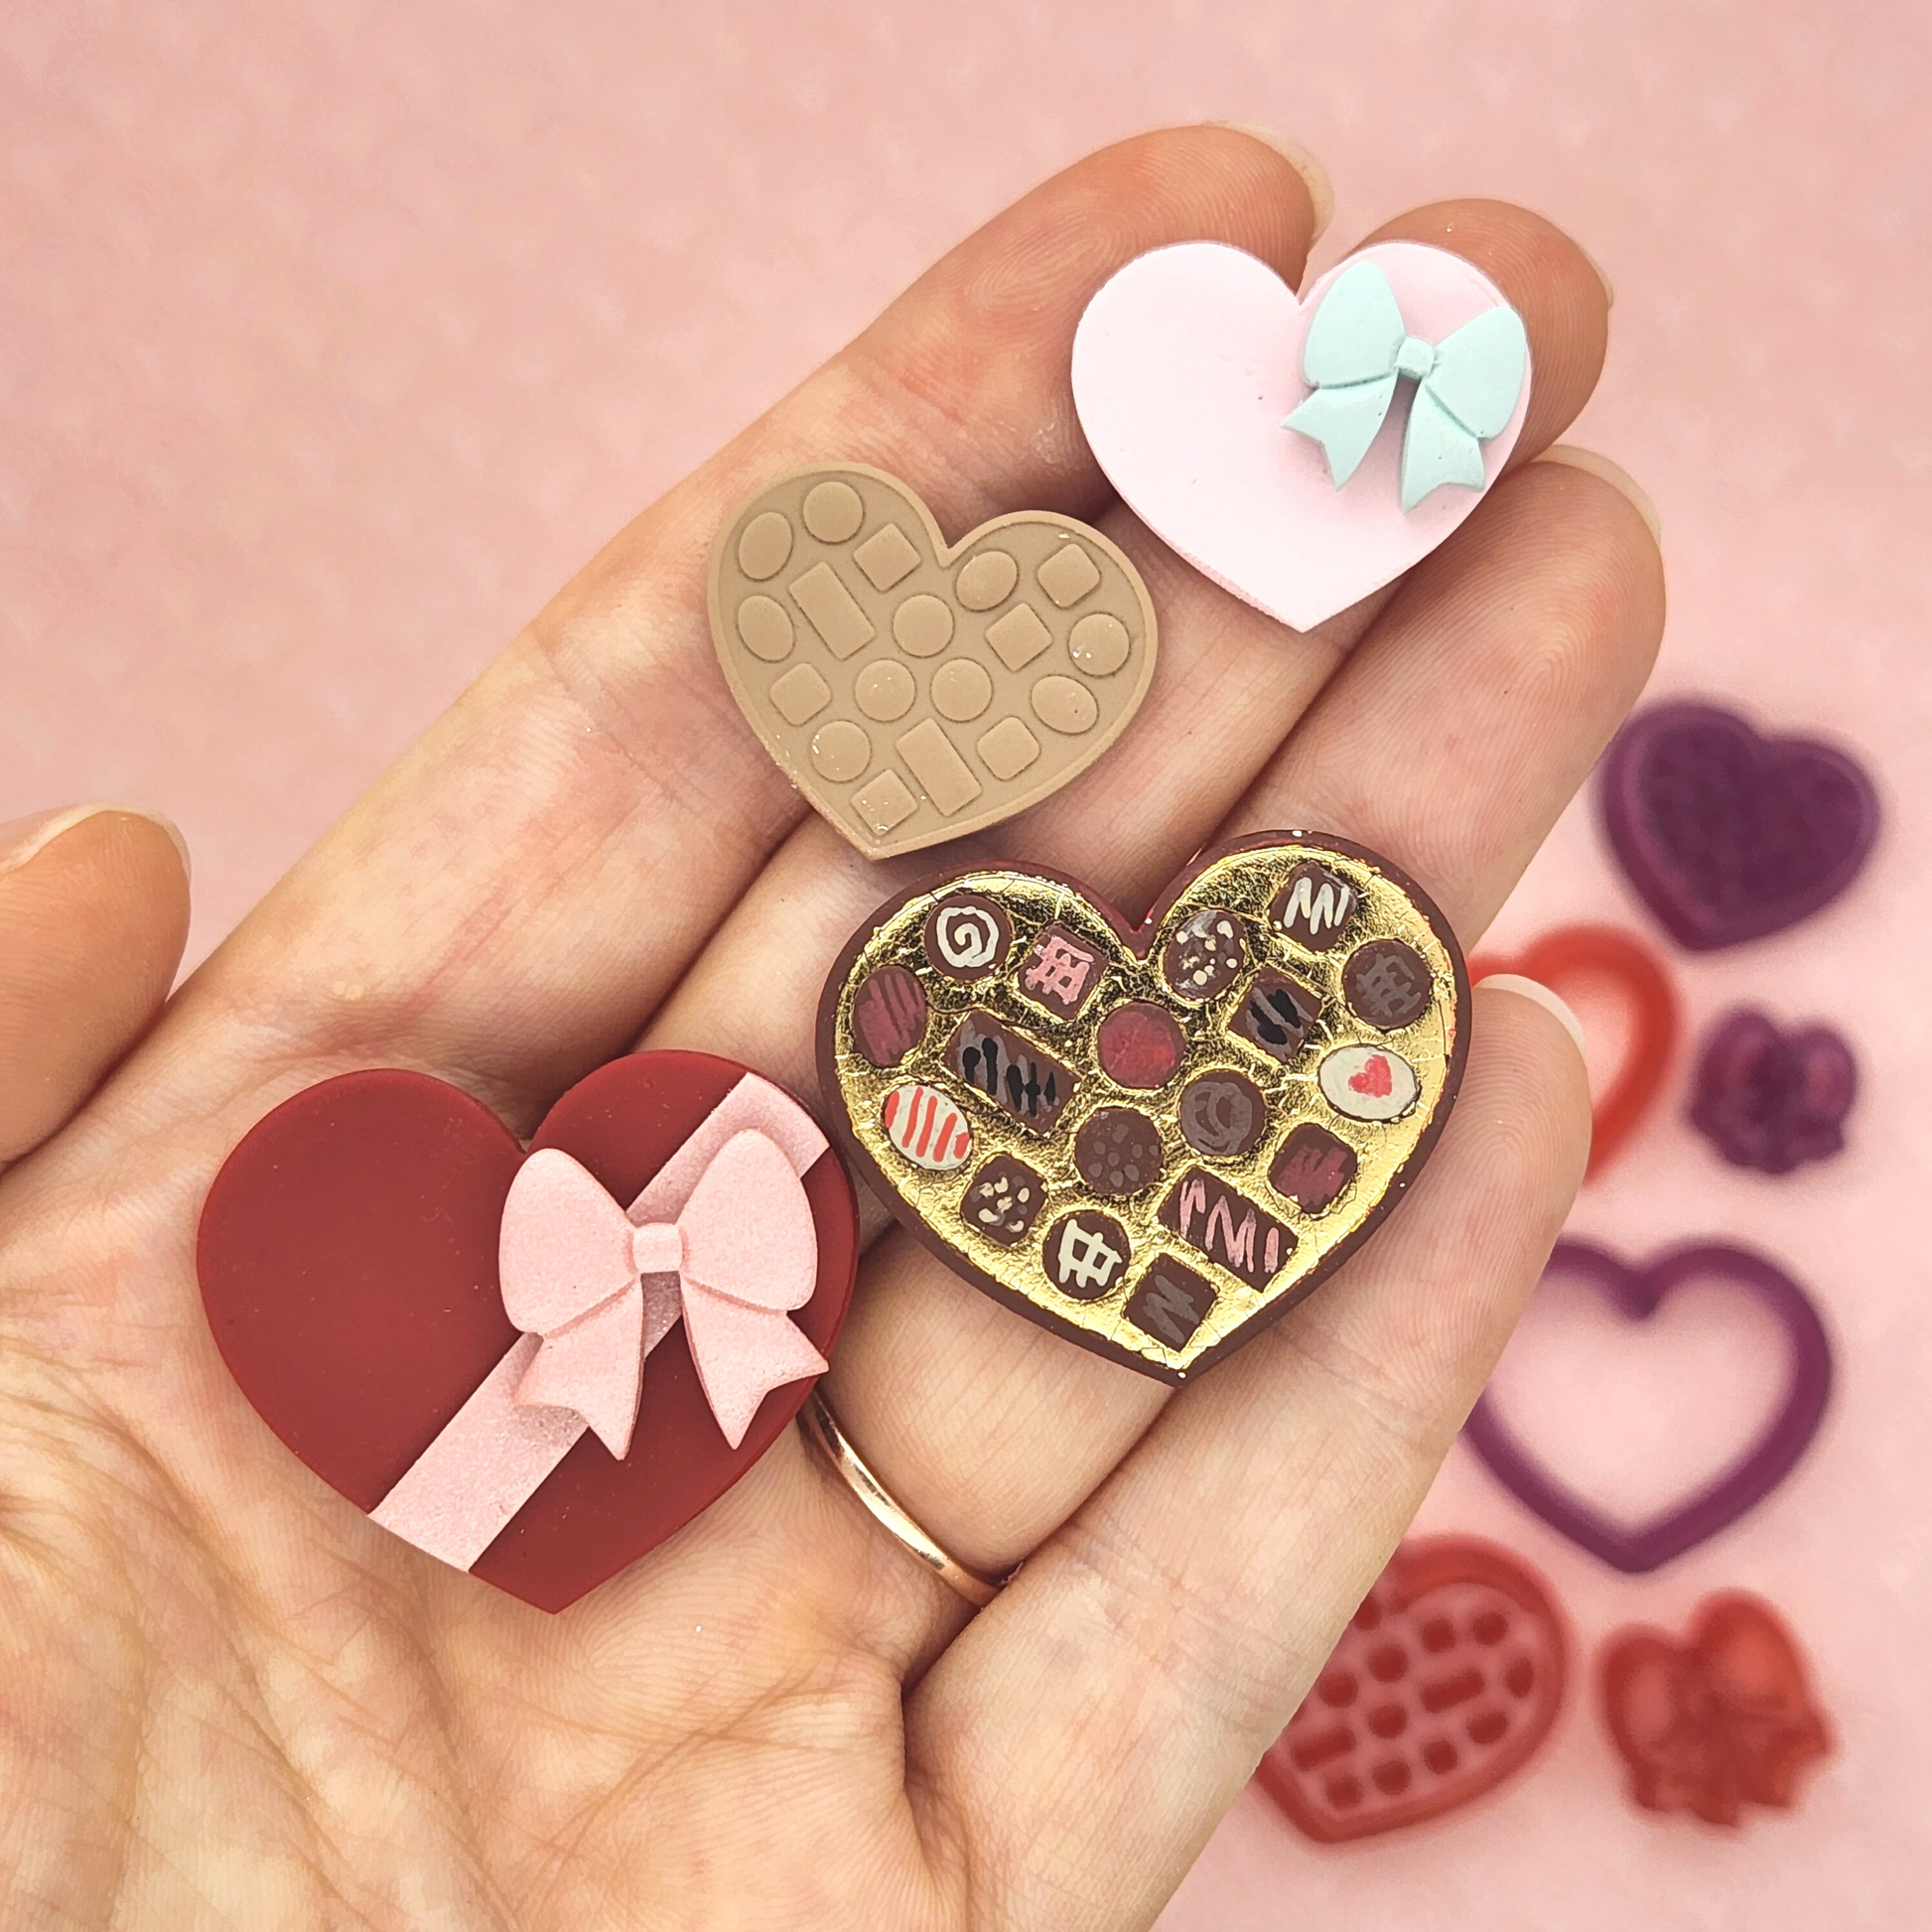 Love Conversation Valentines Day Clay Cutters Valentines Polymer Clay  Cutters Cute Clay Cutter Set Clay Tools Stud Earrings Cutters 